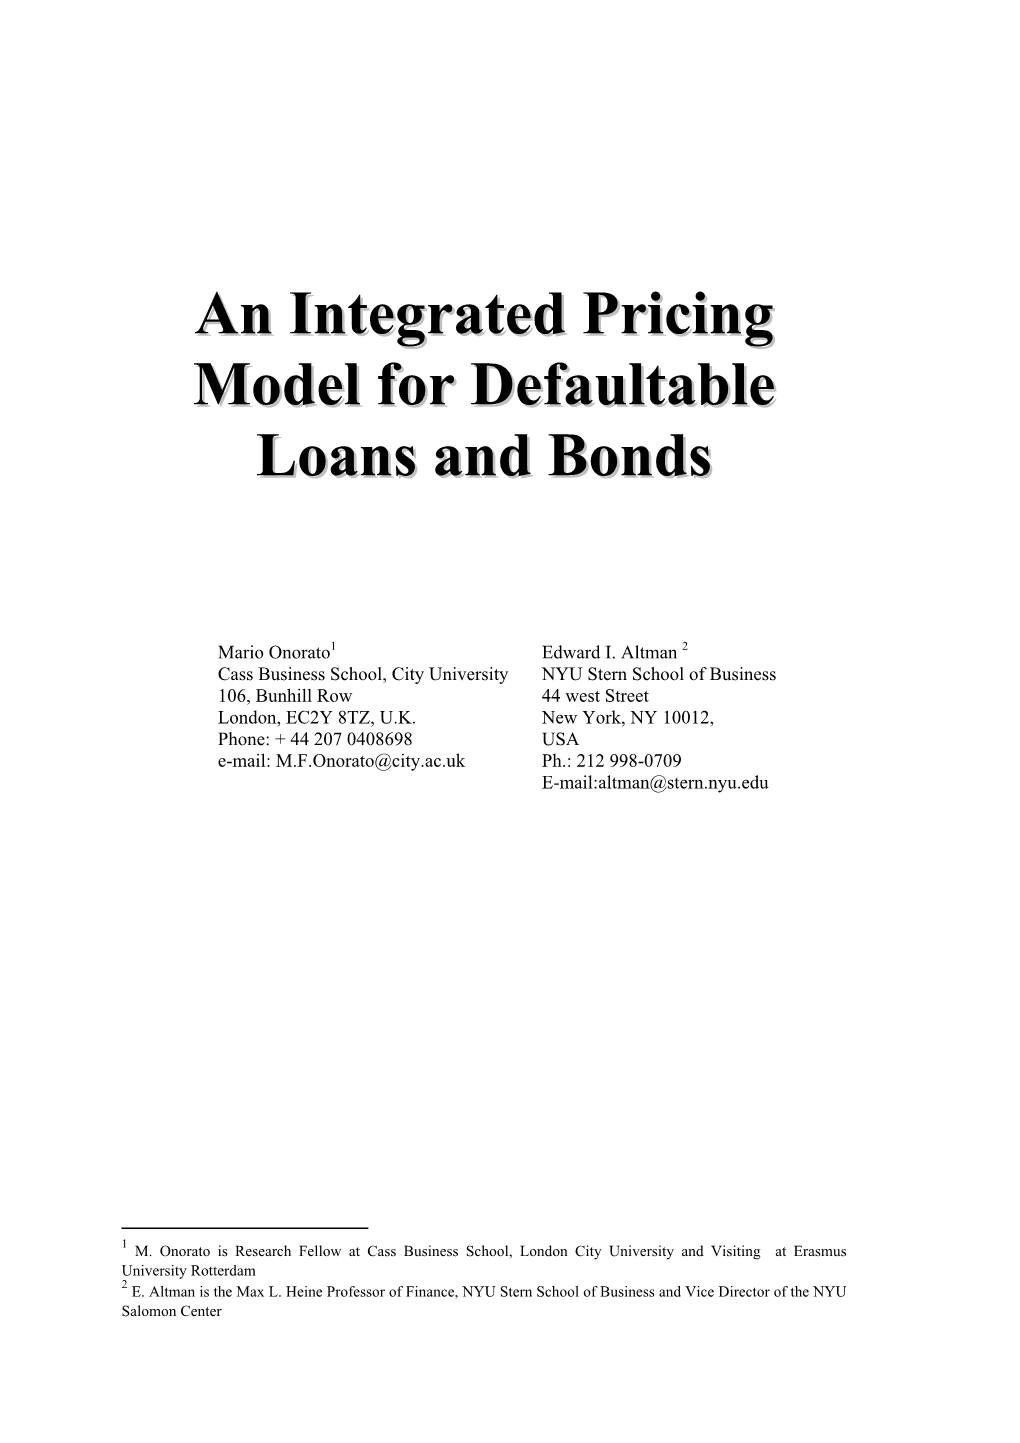 Integrated Pricing Model for Defaultable Loans and Bonds